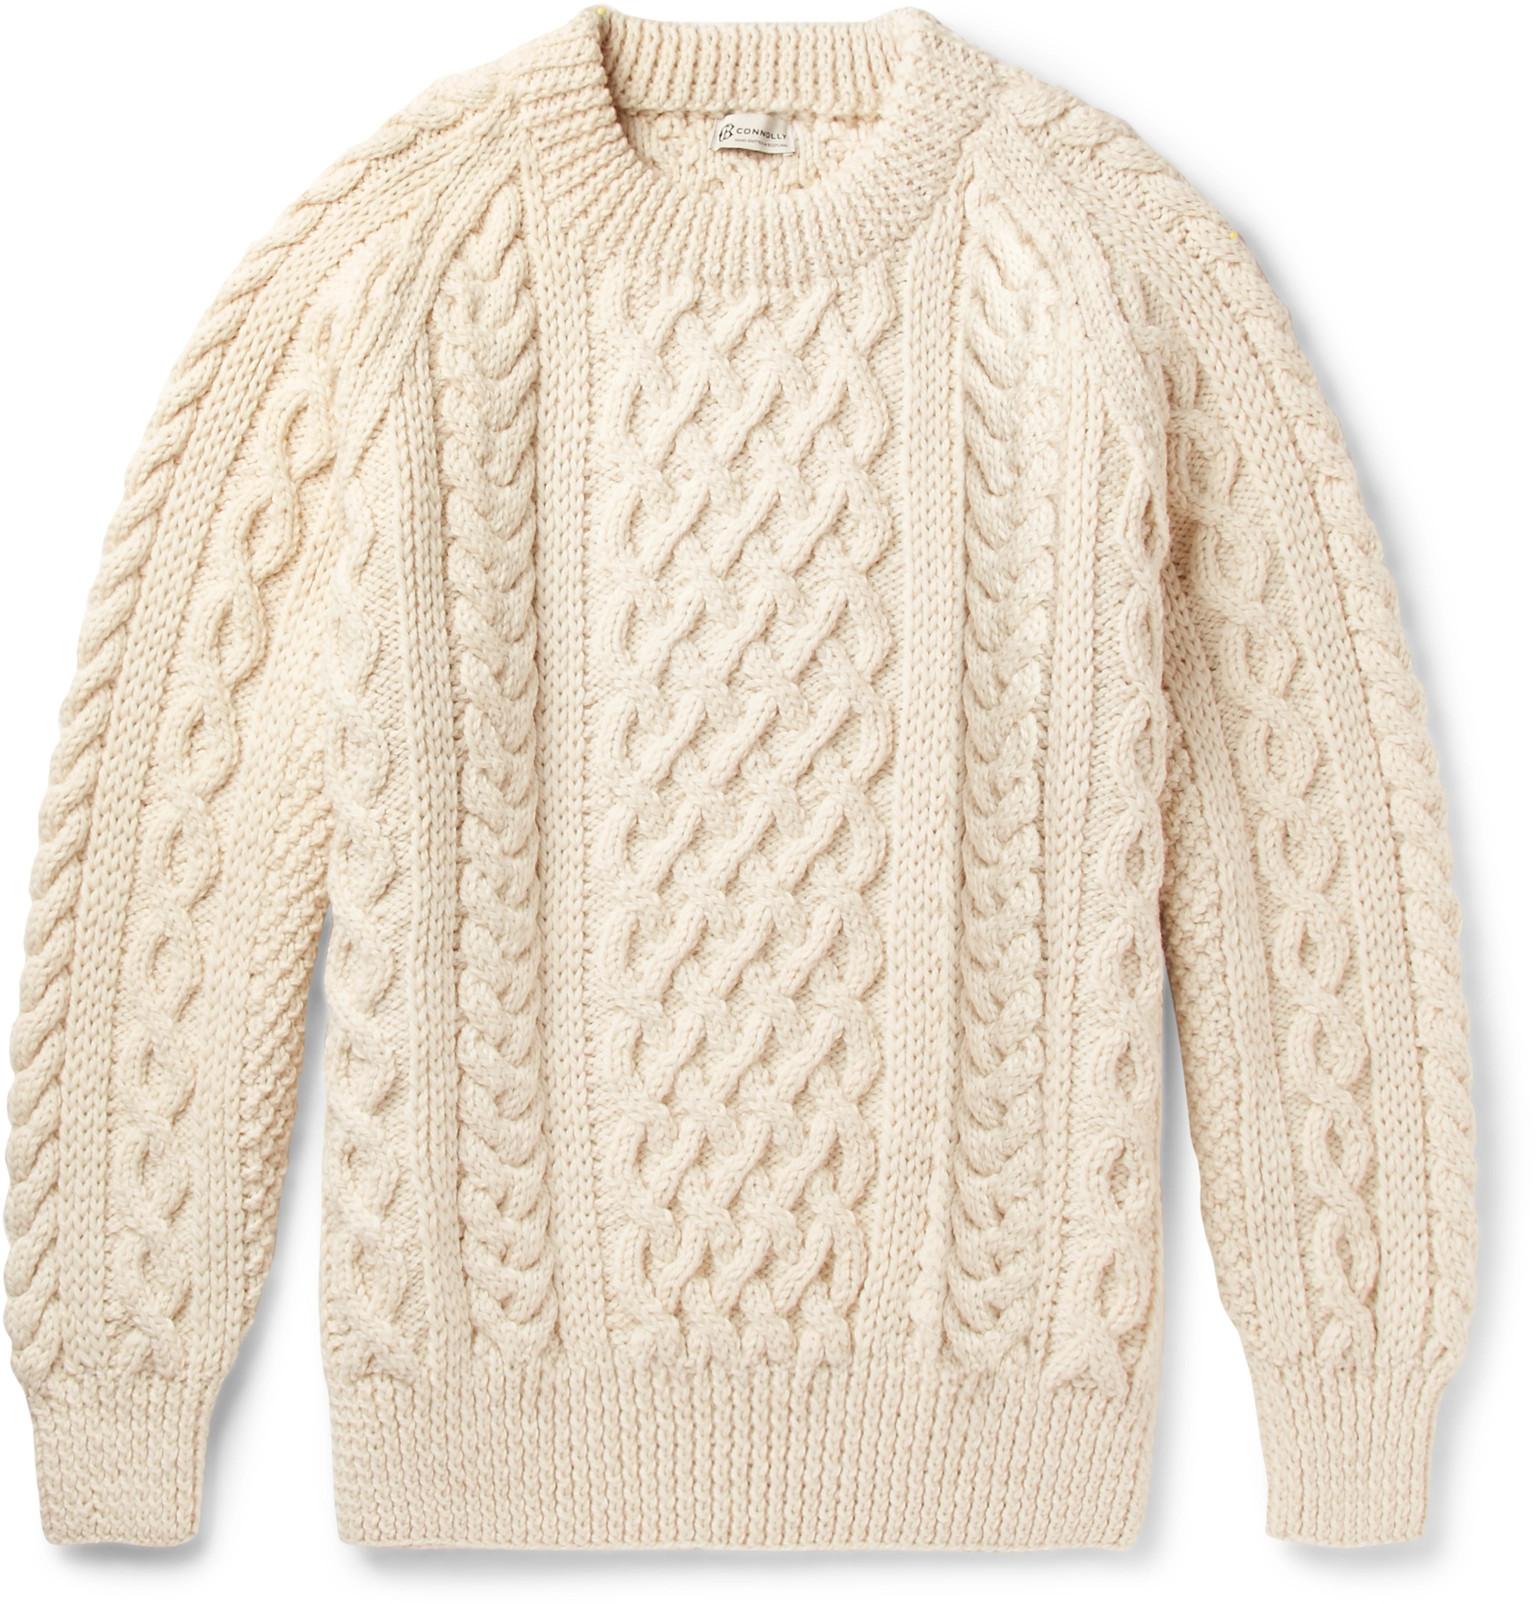 Men sweater, Mens cable knit sweater, Sweaters